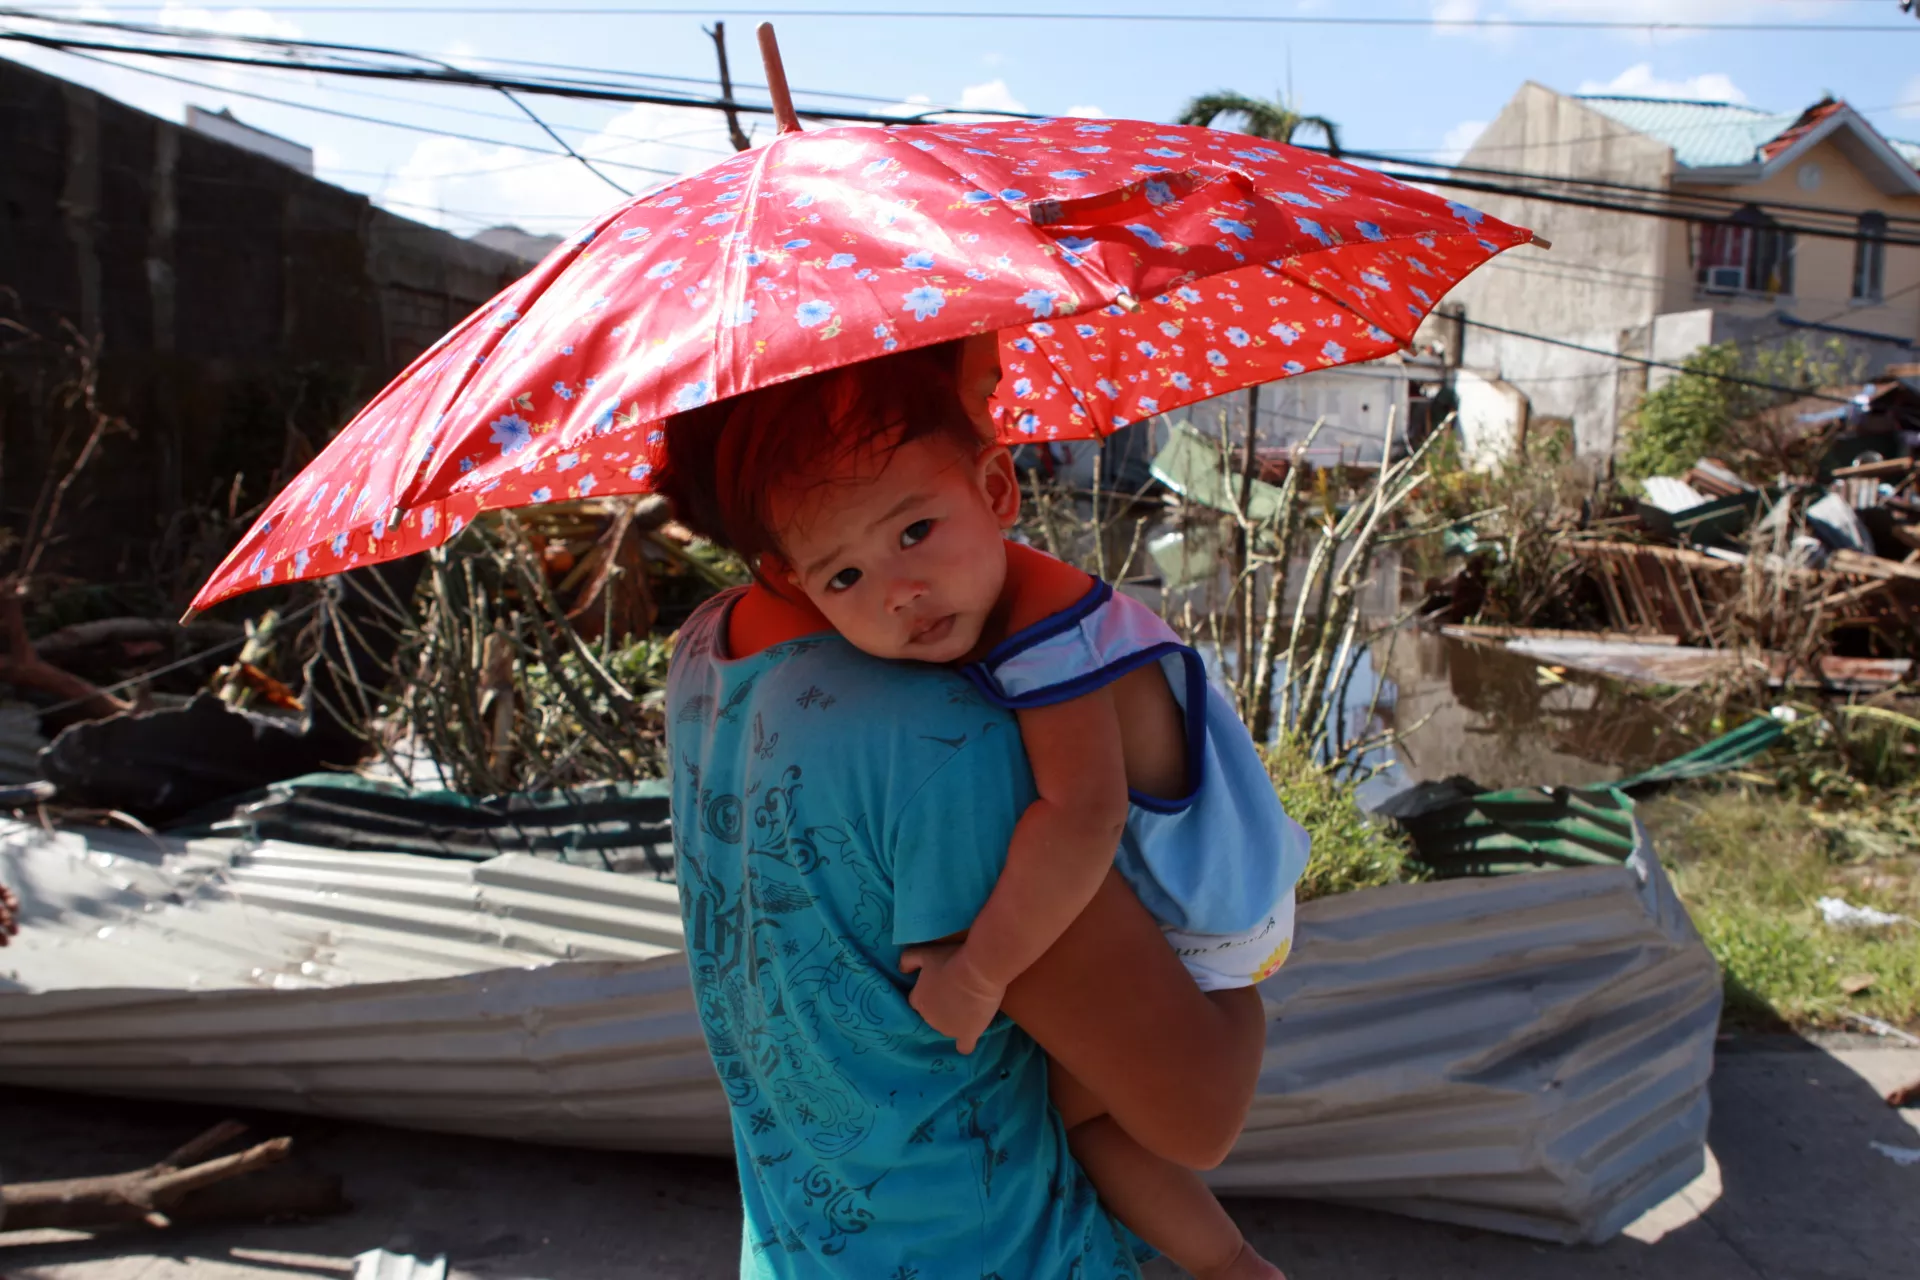 A woman carrying her daughter under an umbrella walks past some of the damage and destruction caused by Super Typhoon Haiyan, in Tacloban City.